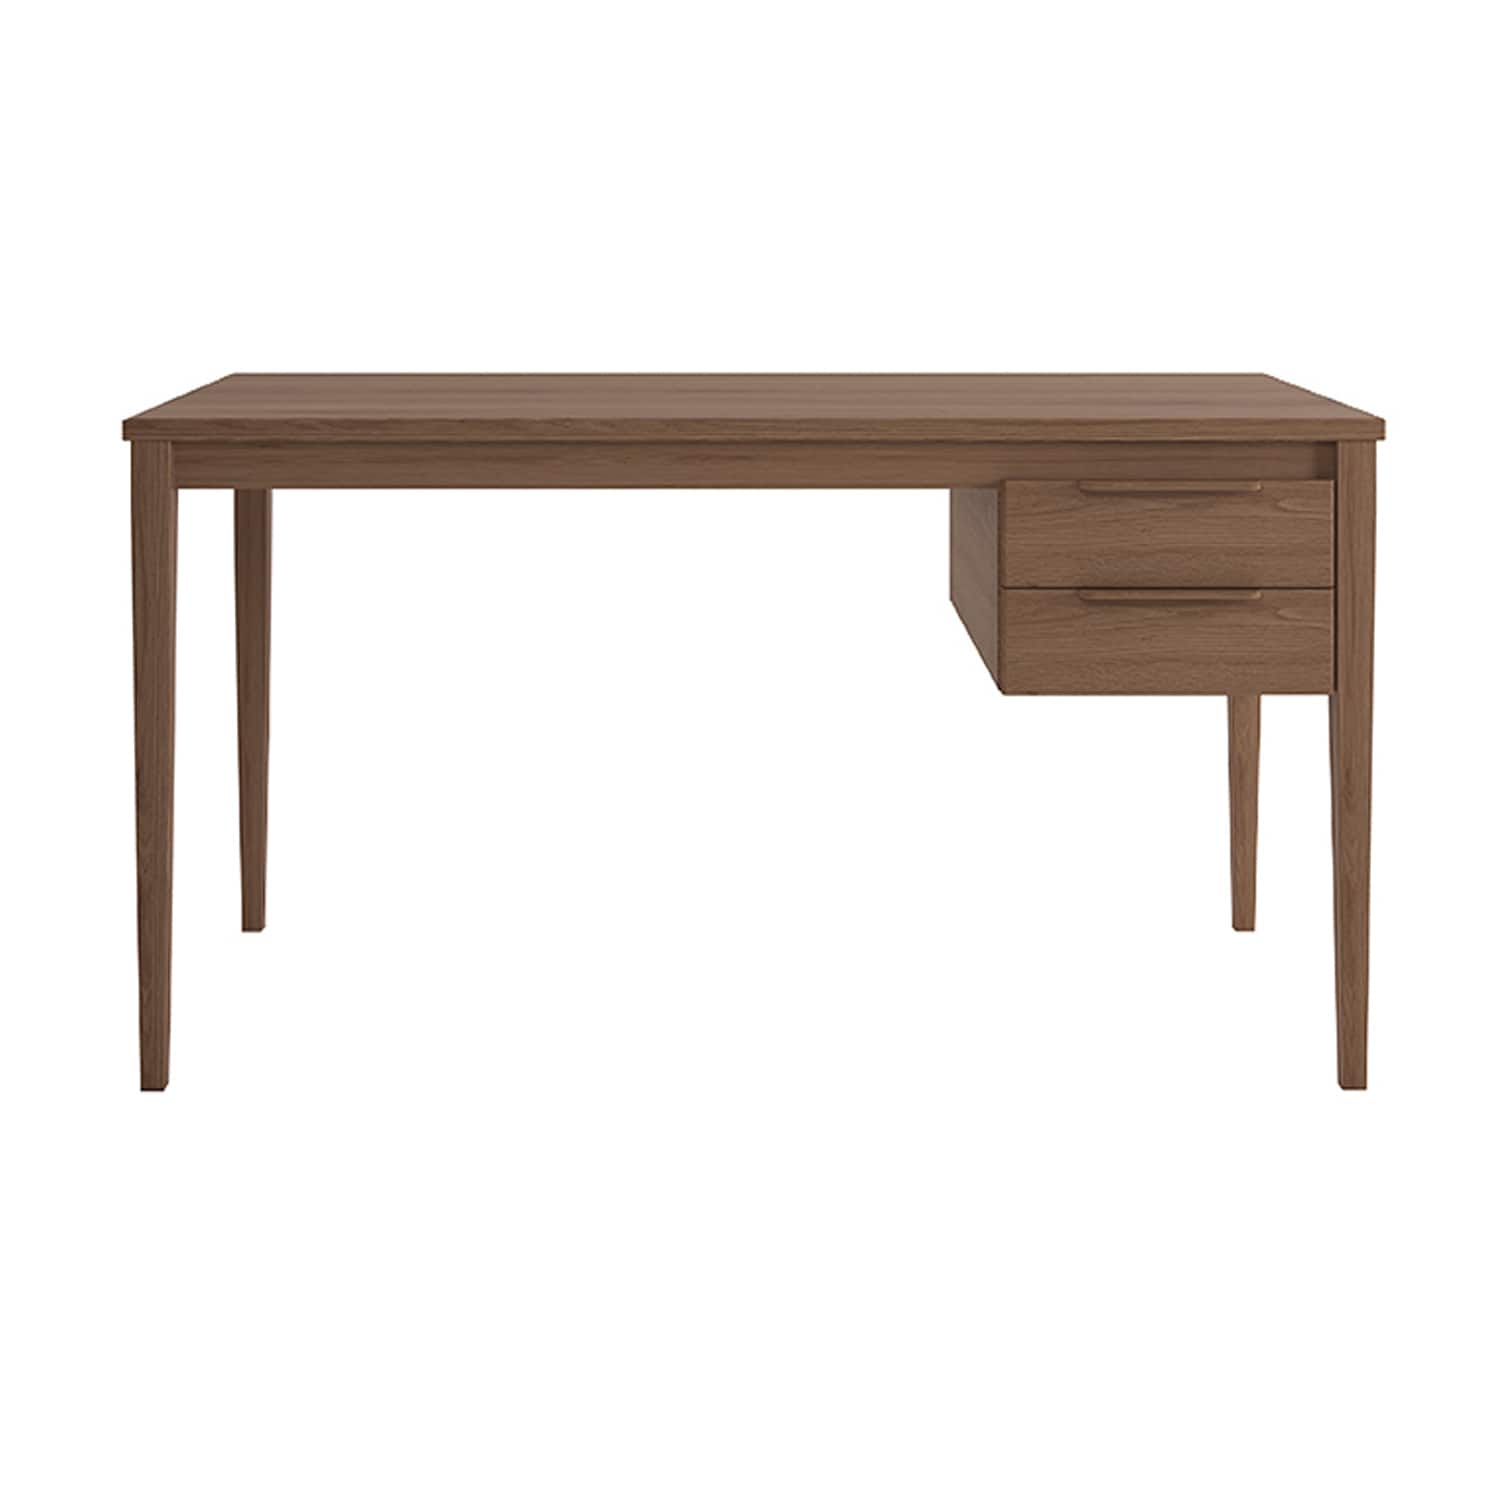 Classy Working Table 140cm (Teak) - Furniture Source Philippines